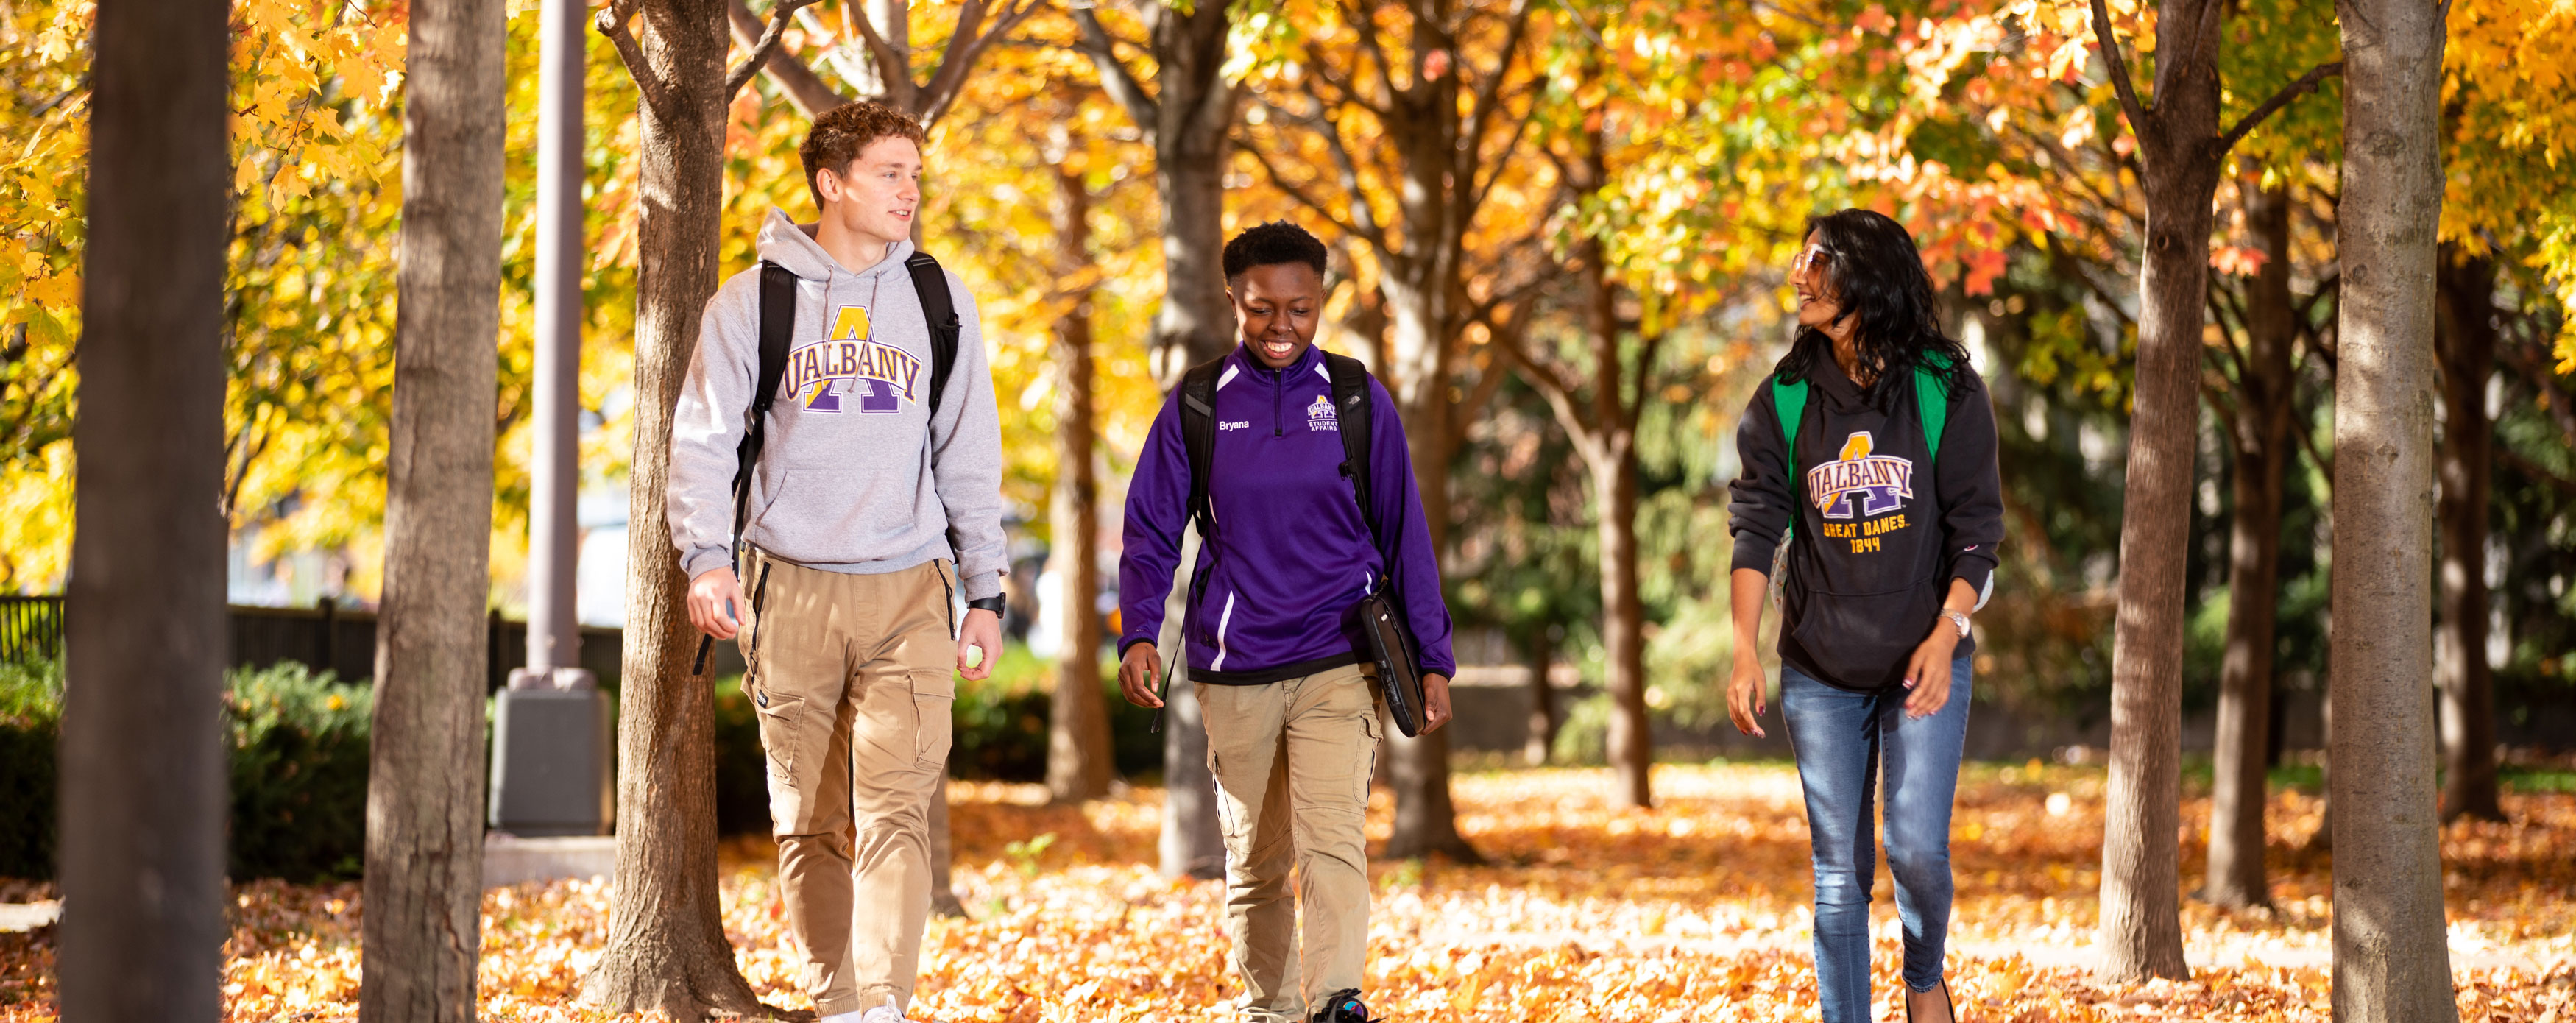 Three students smile as they walk through fall foliage on campus.